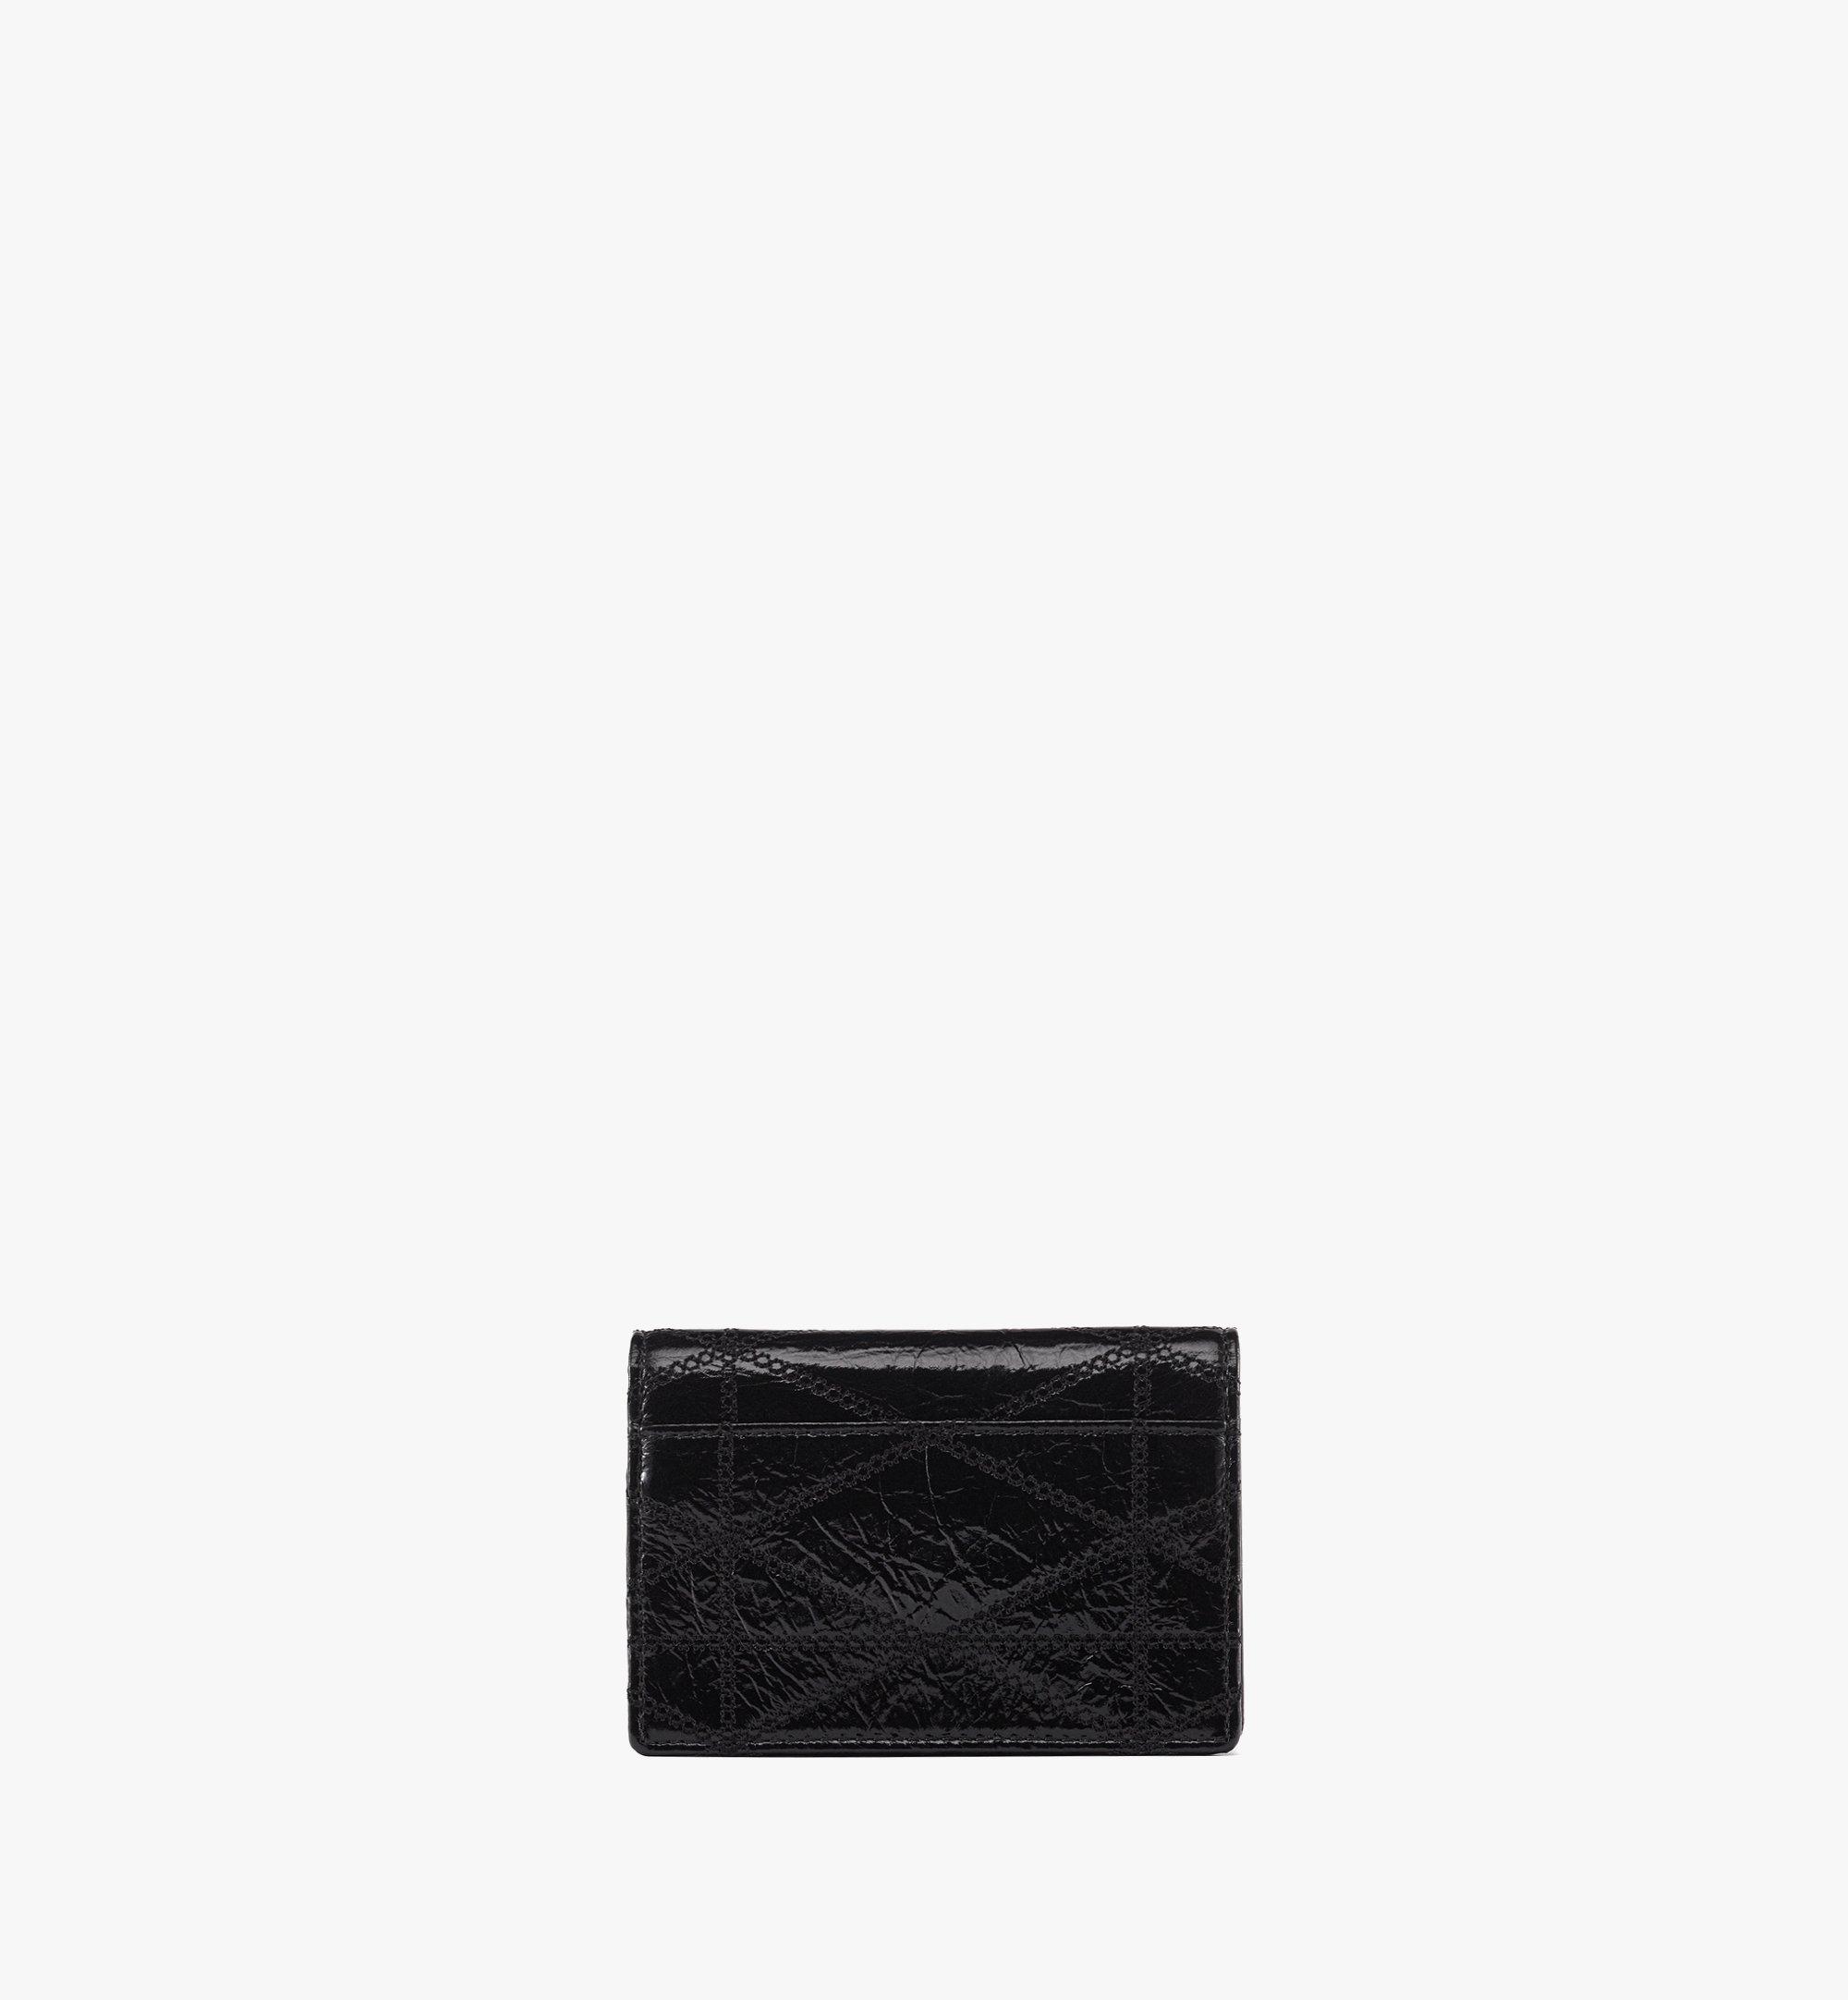 MCM Travia Quilted Card Wallet in Crushed Leather Black MYADALM01BK001 Alternate View 2